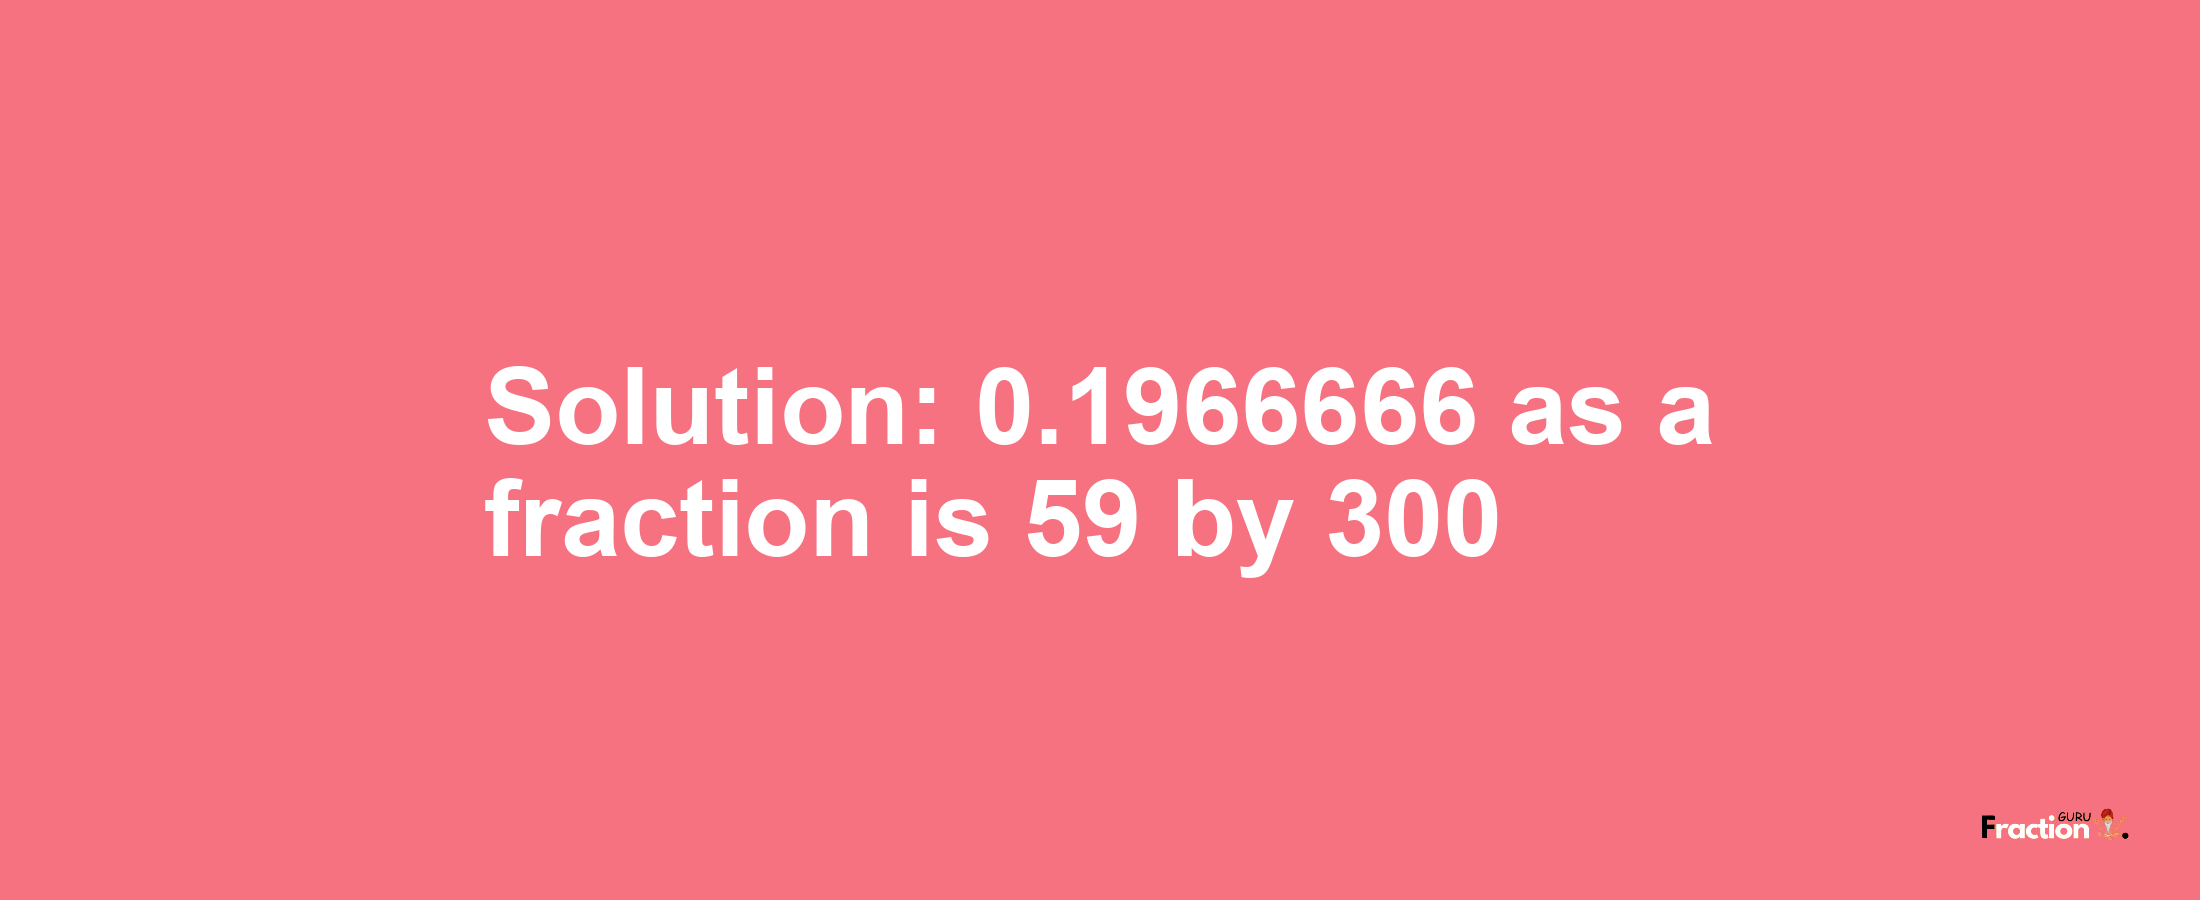 Solution:0.1966666 as a fraction is 59/300